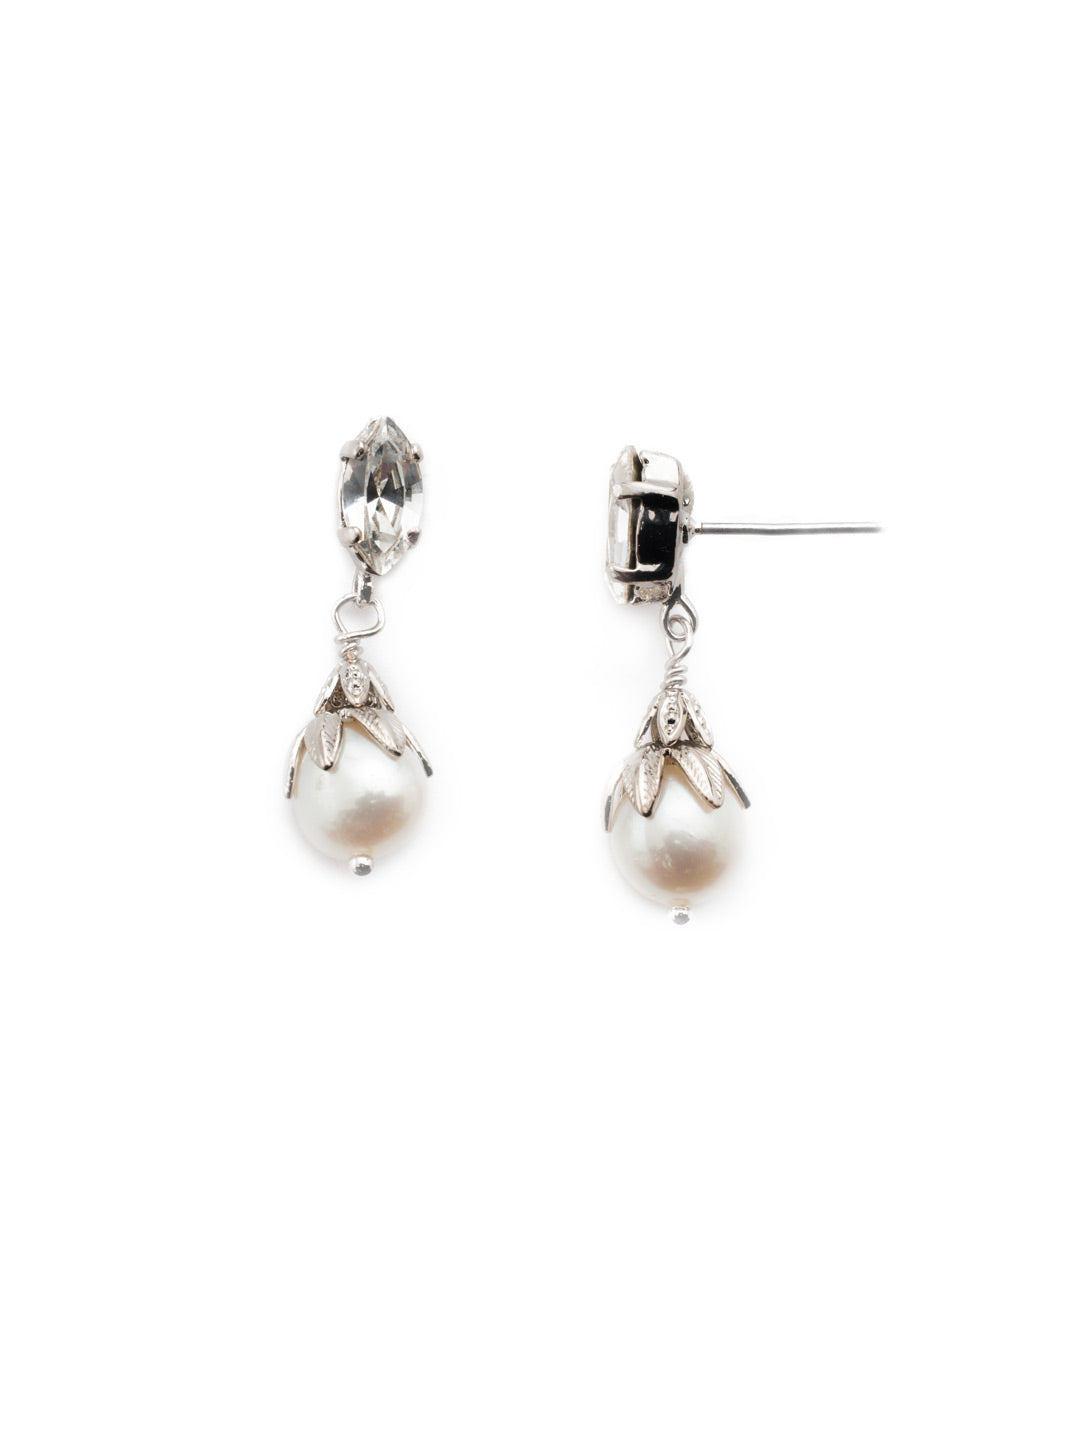 Jovi Dangle Earrings - 4EEF5RHCRY - <p>Simple. Stunning. A single pearl dangles from this navette cut crystal that makes the perfect gift for anyone - including yourself. We won't tell. From Sorrelli's Crystal collection in our Palladium Silver-tone finish.</p>